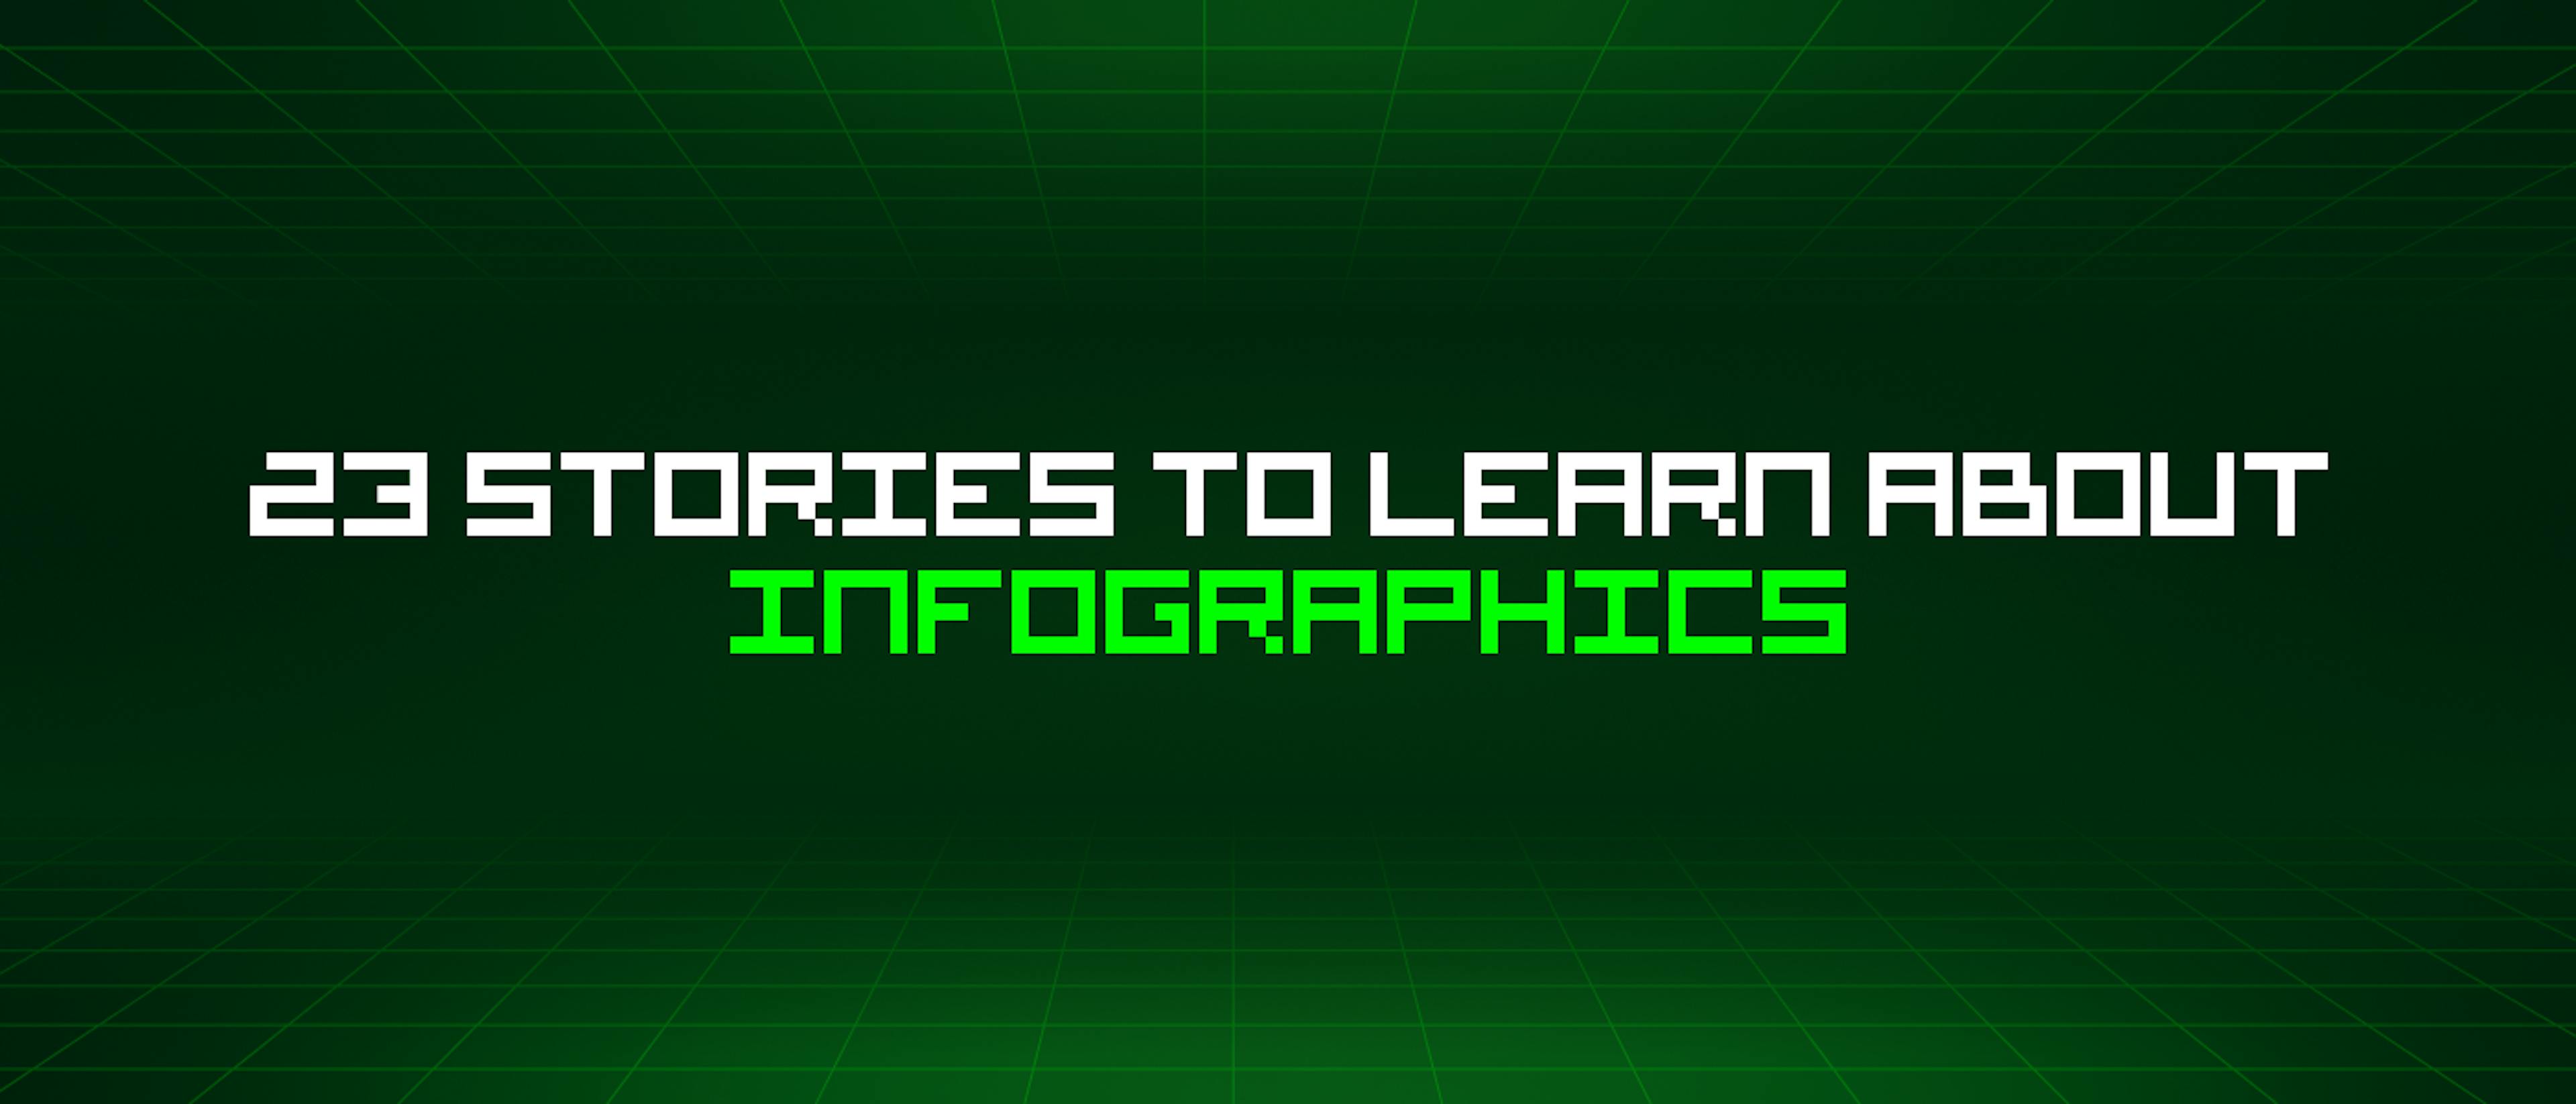 featured image - 23 Stories To Learn About Infographics